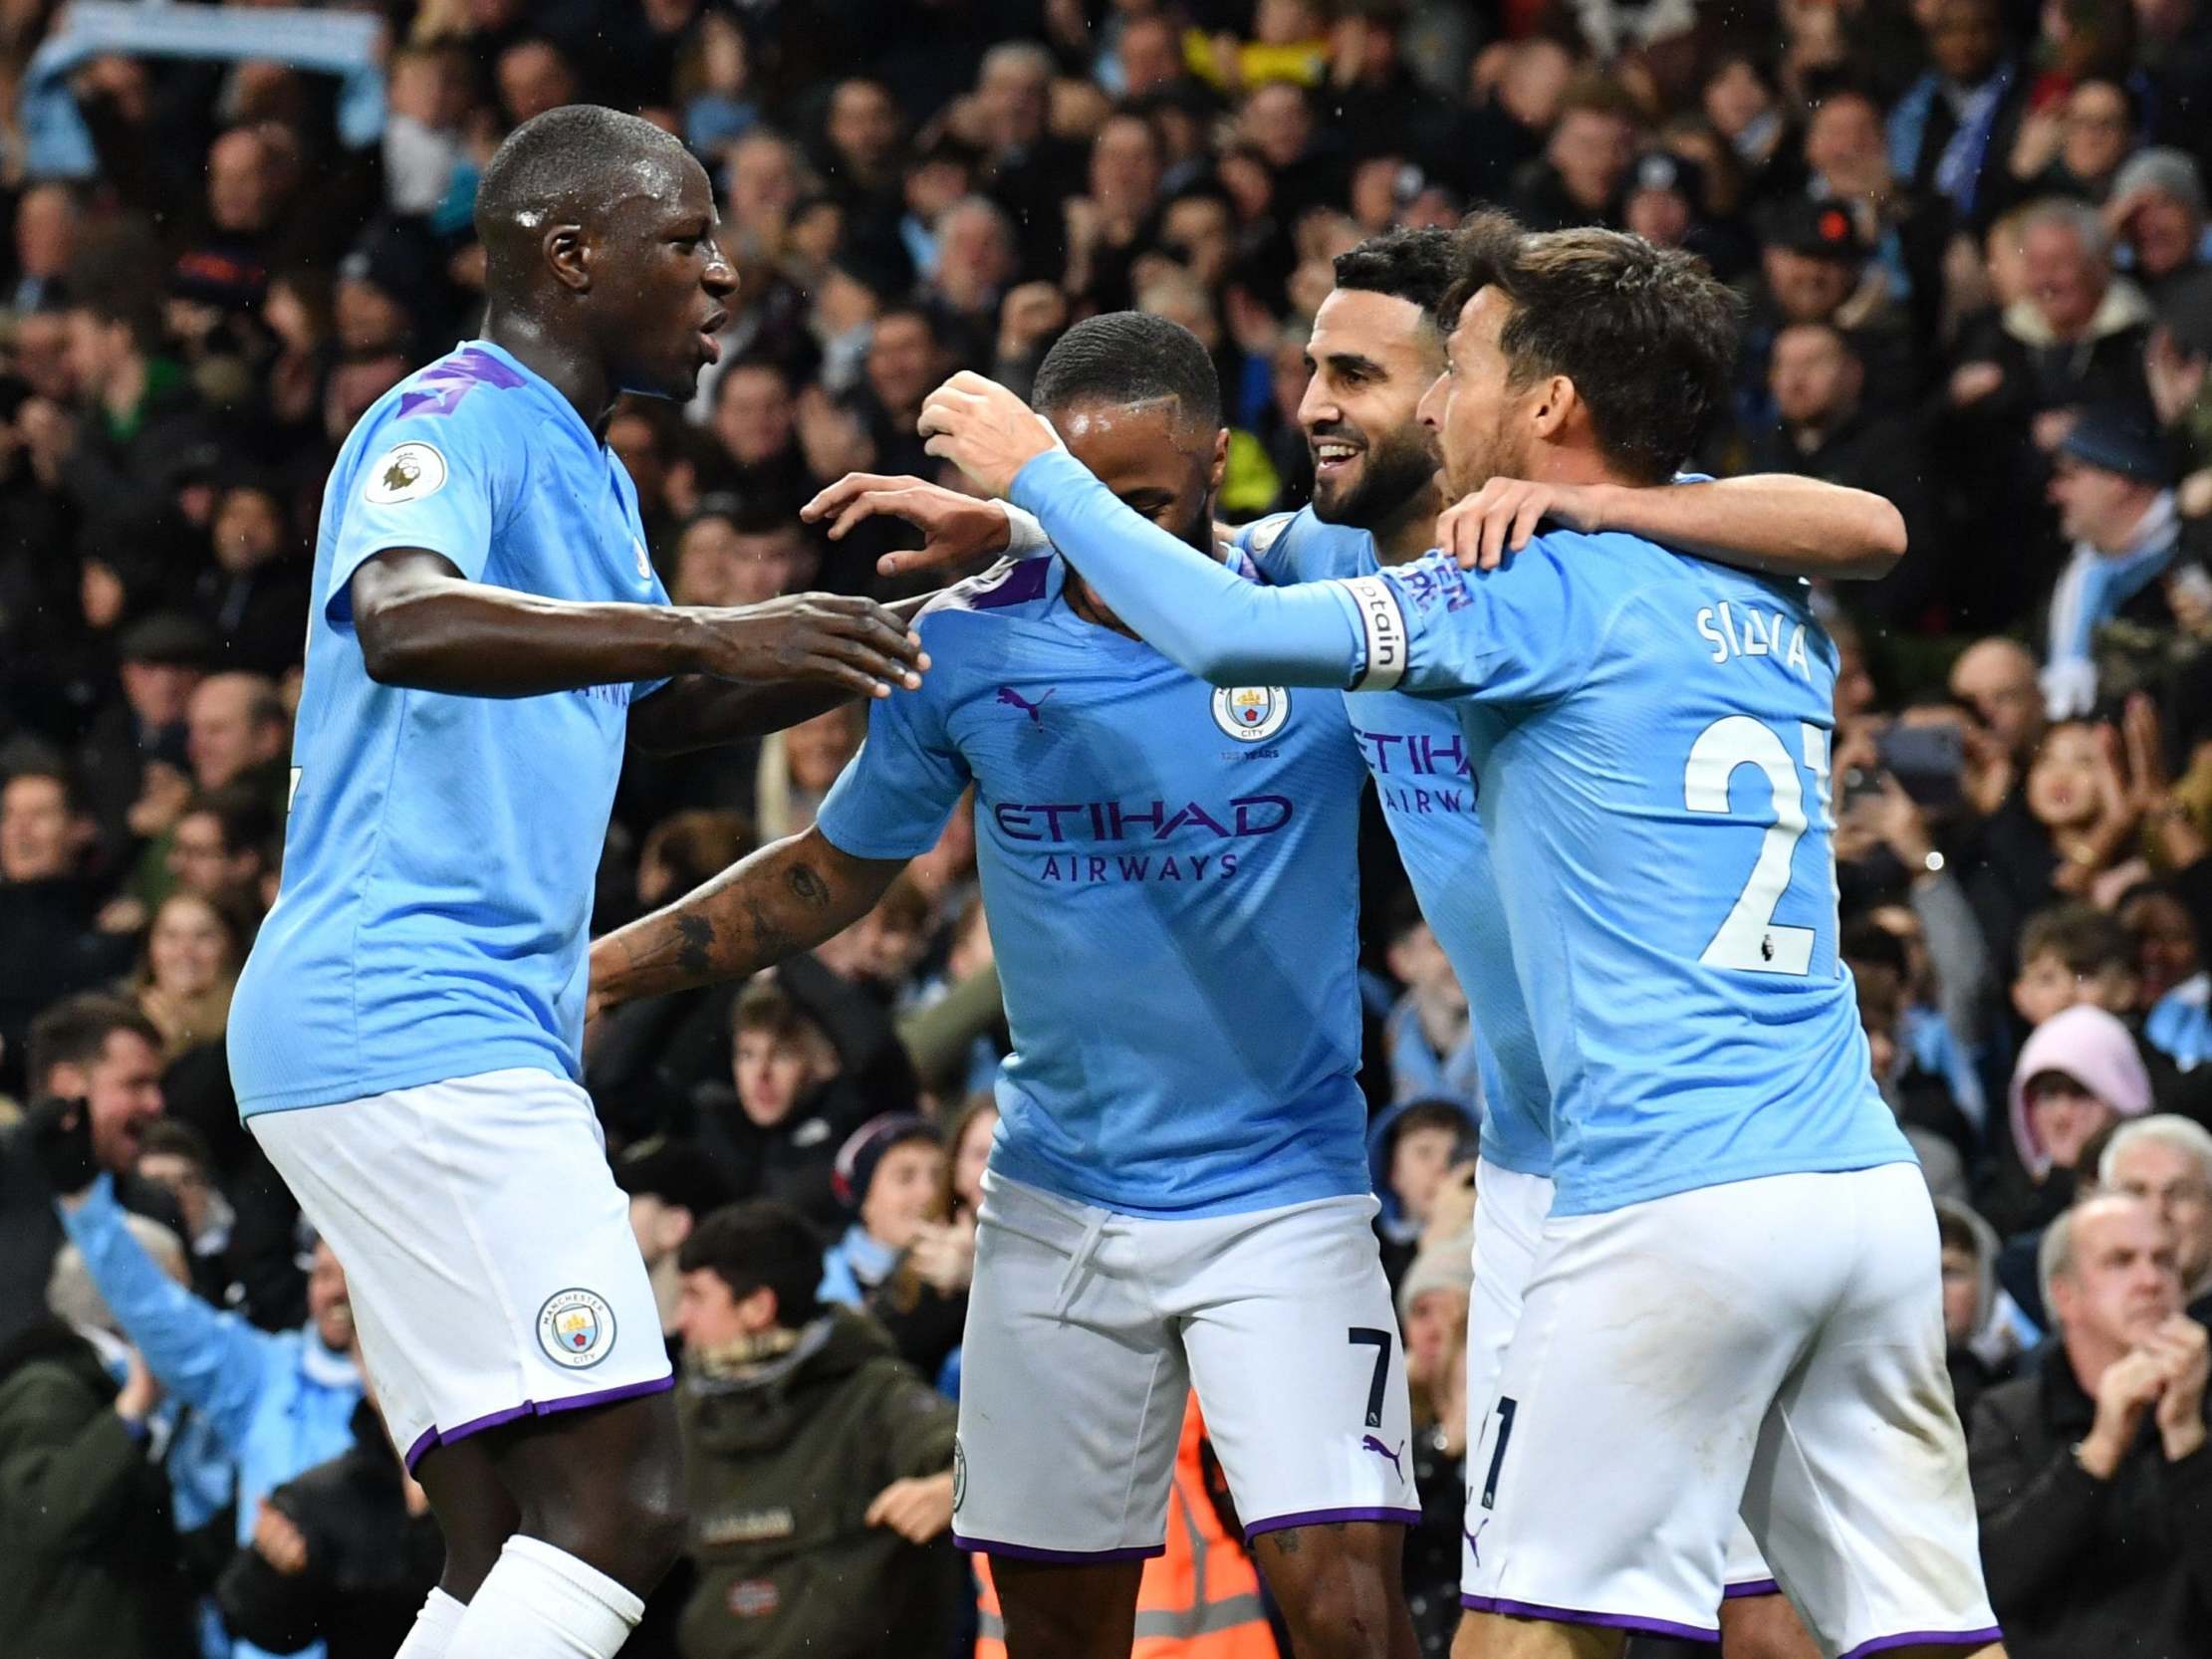 Manchester City held on to beat Chelsea at the Etihad